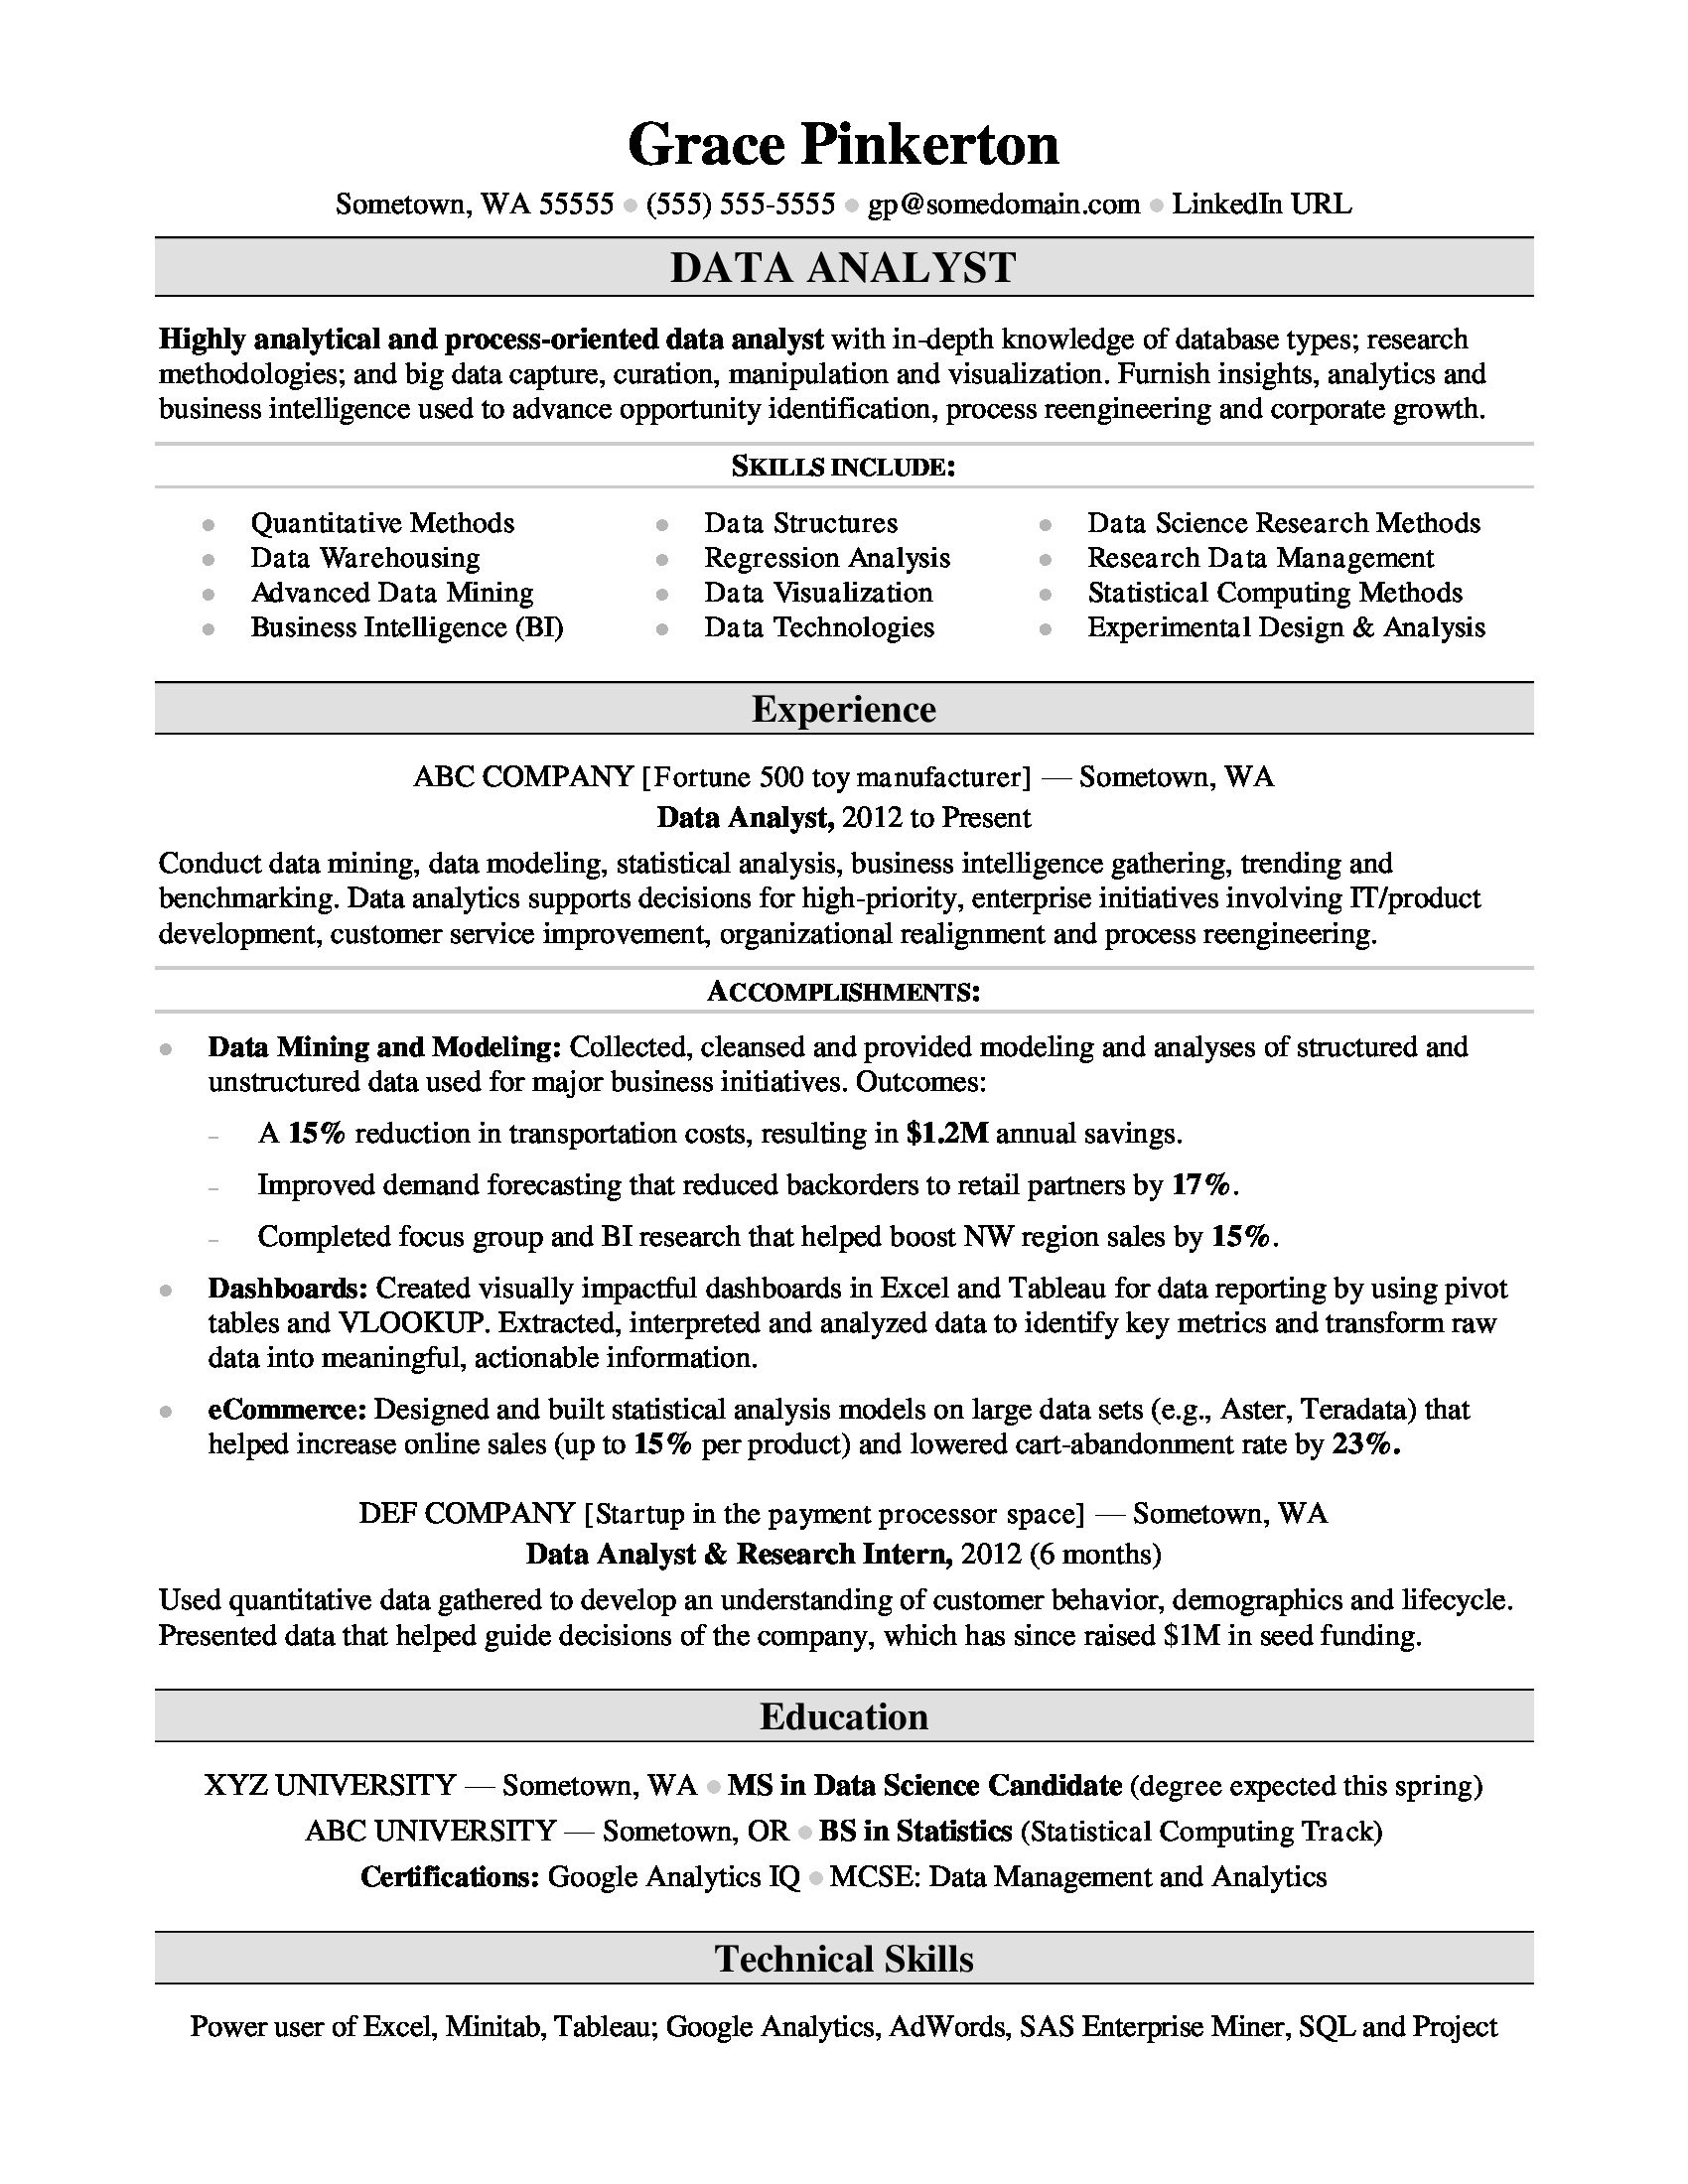 Masters Students Sample Project Resume On Big Data Data Analyst Resume Monster.com